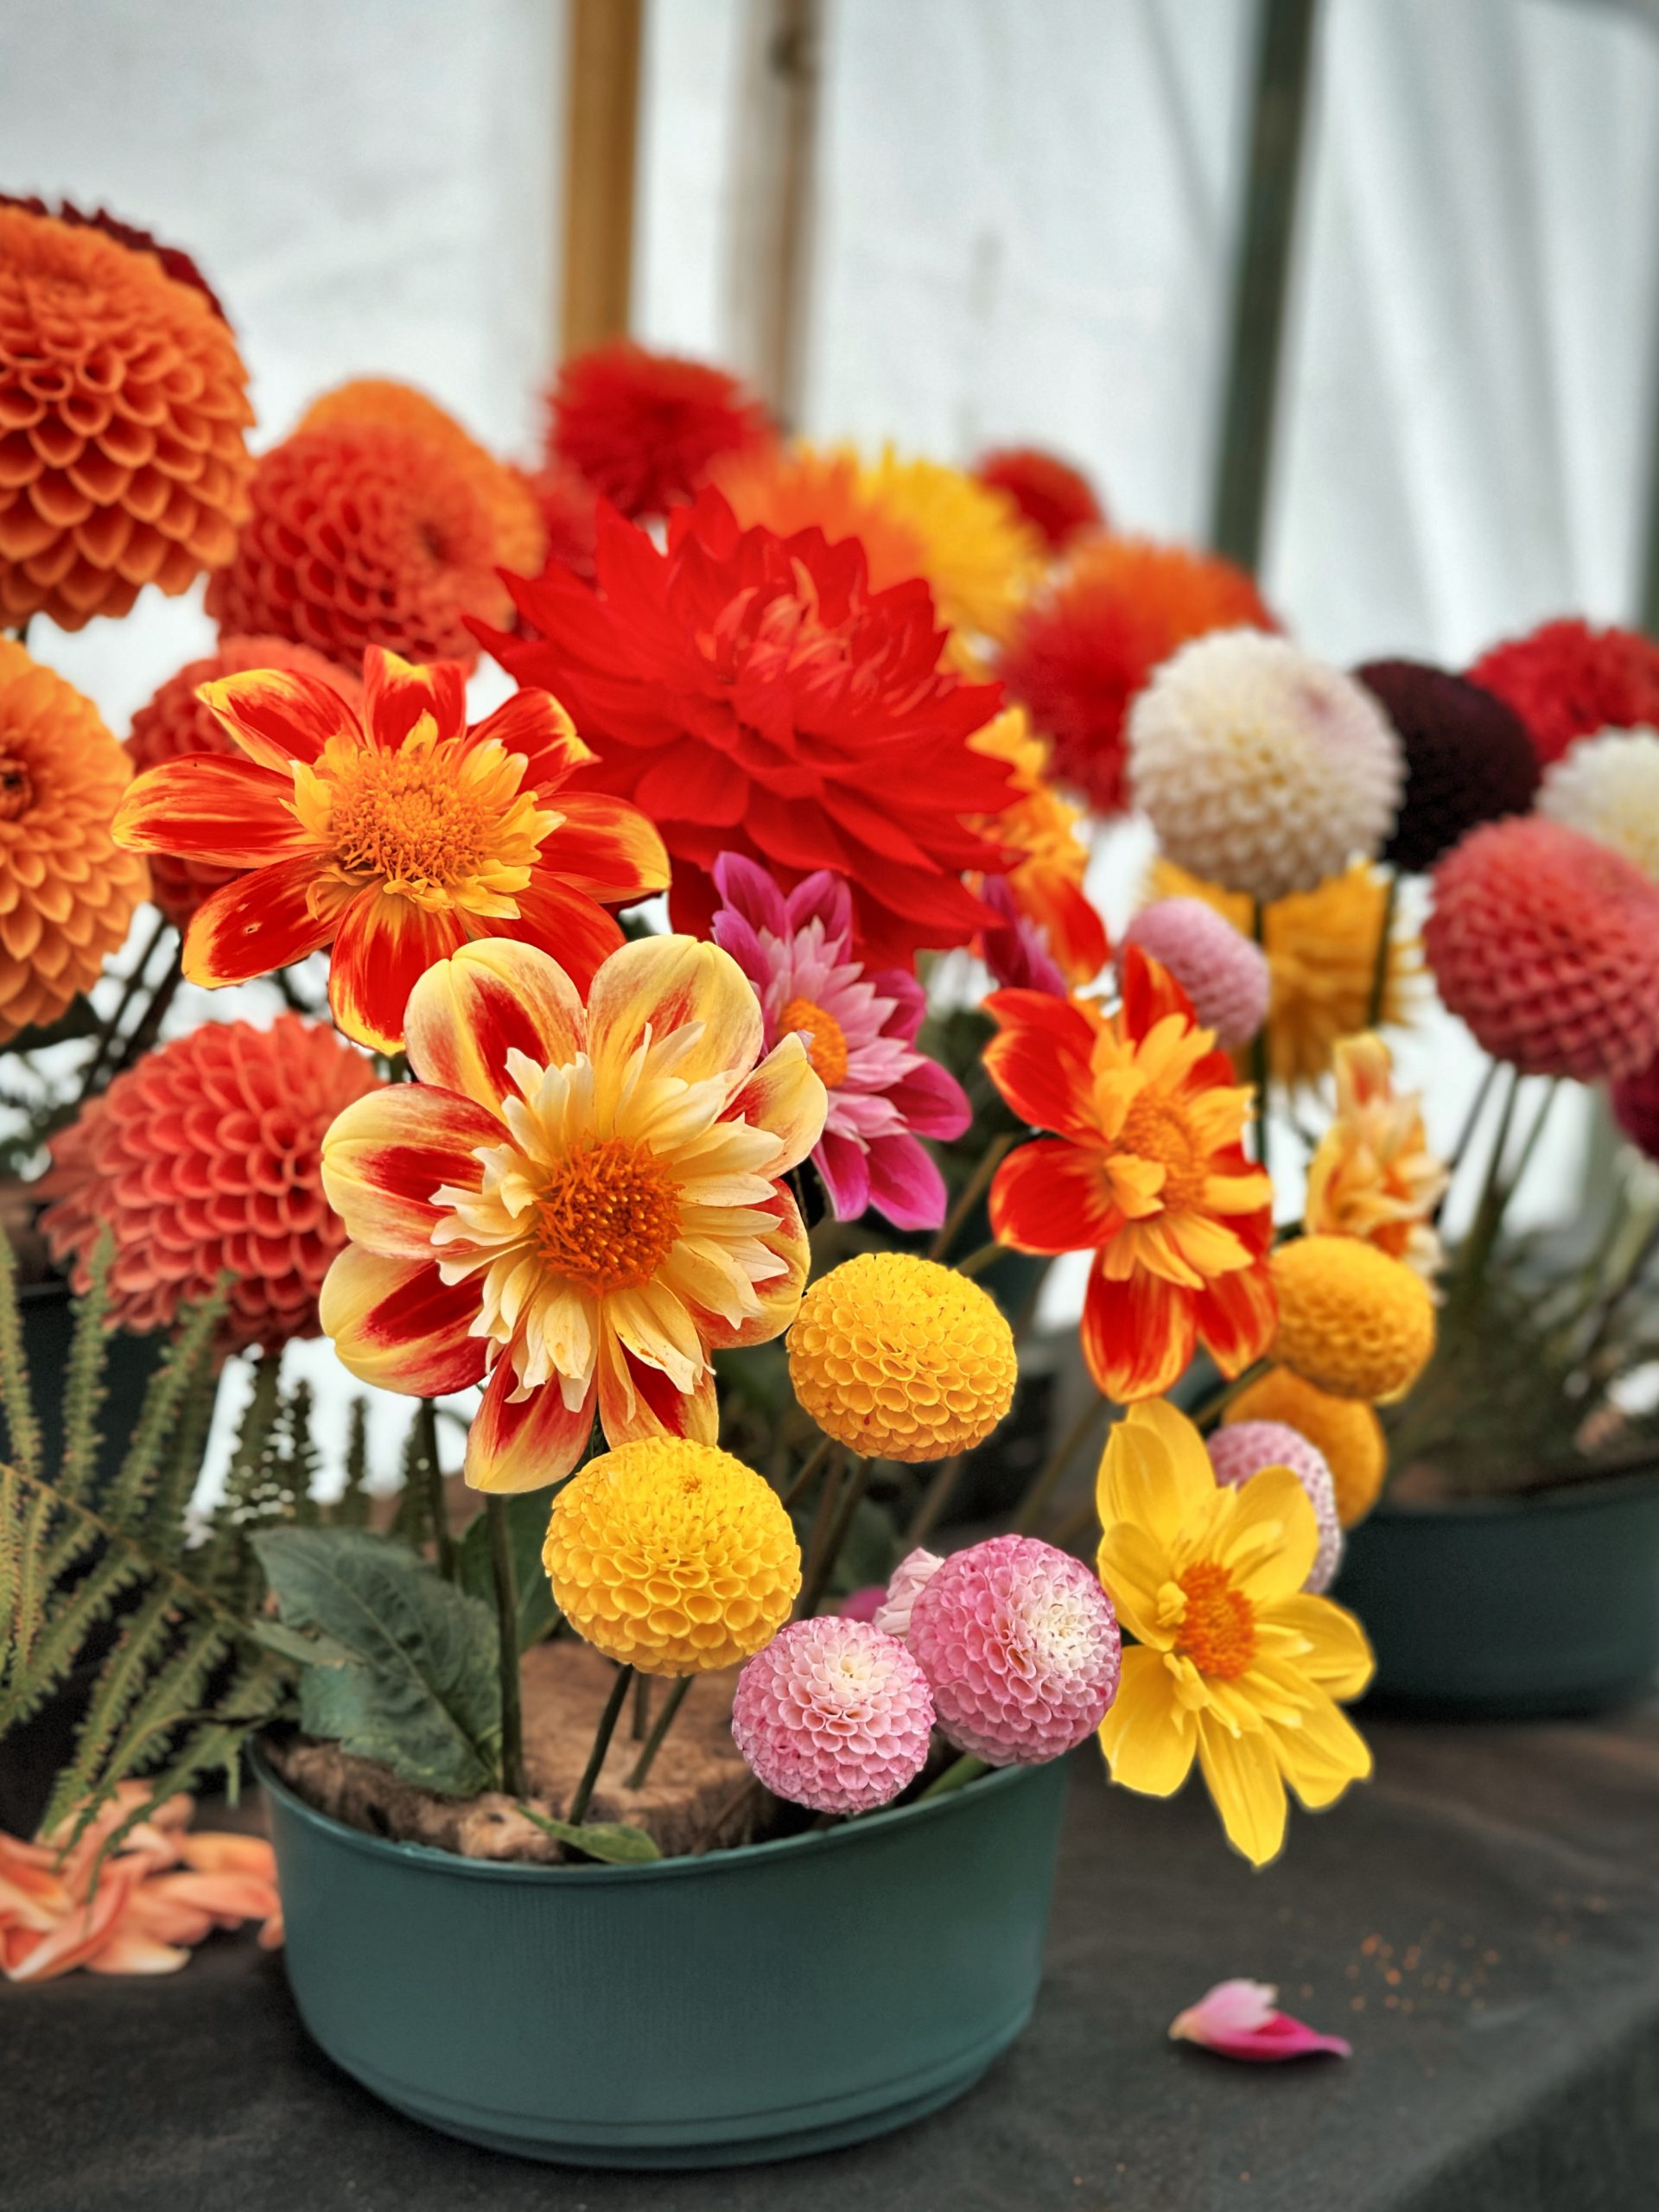 Display of orange, yellow and pink flowers